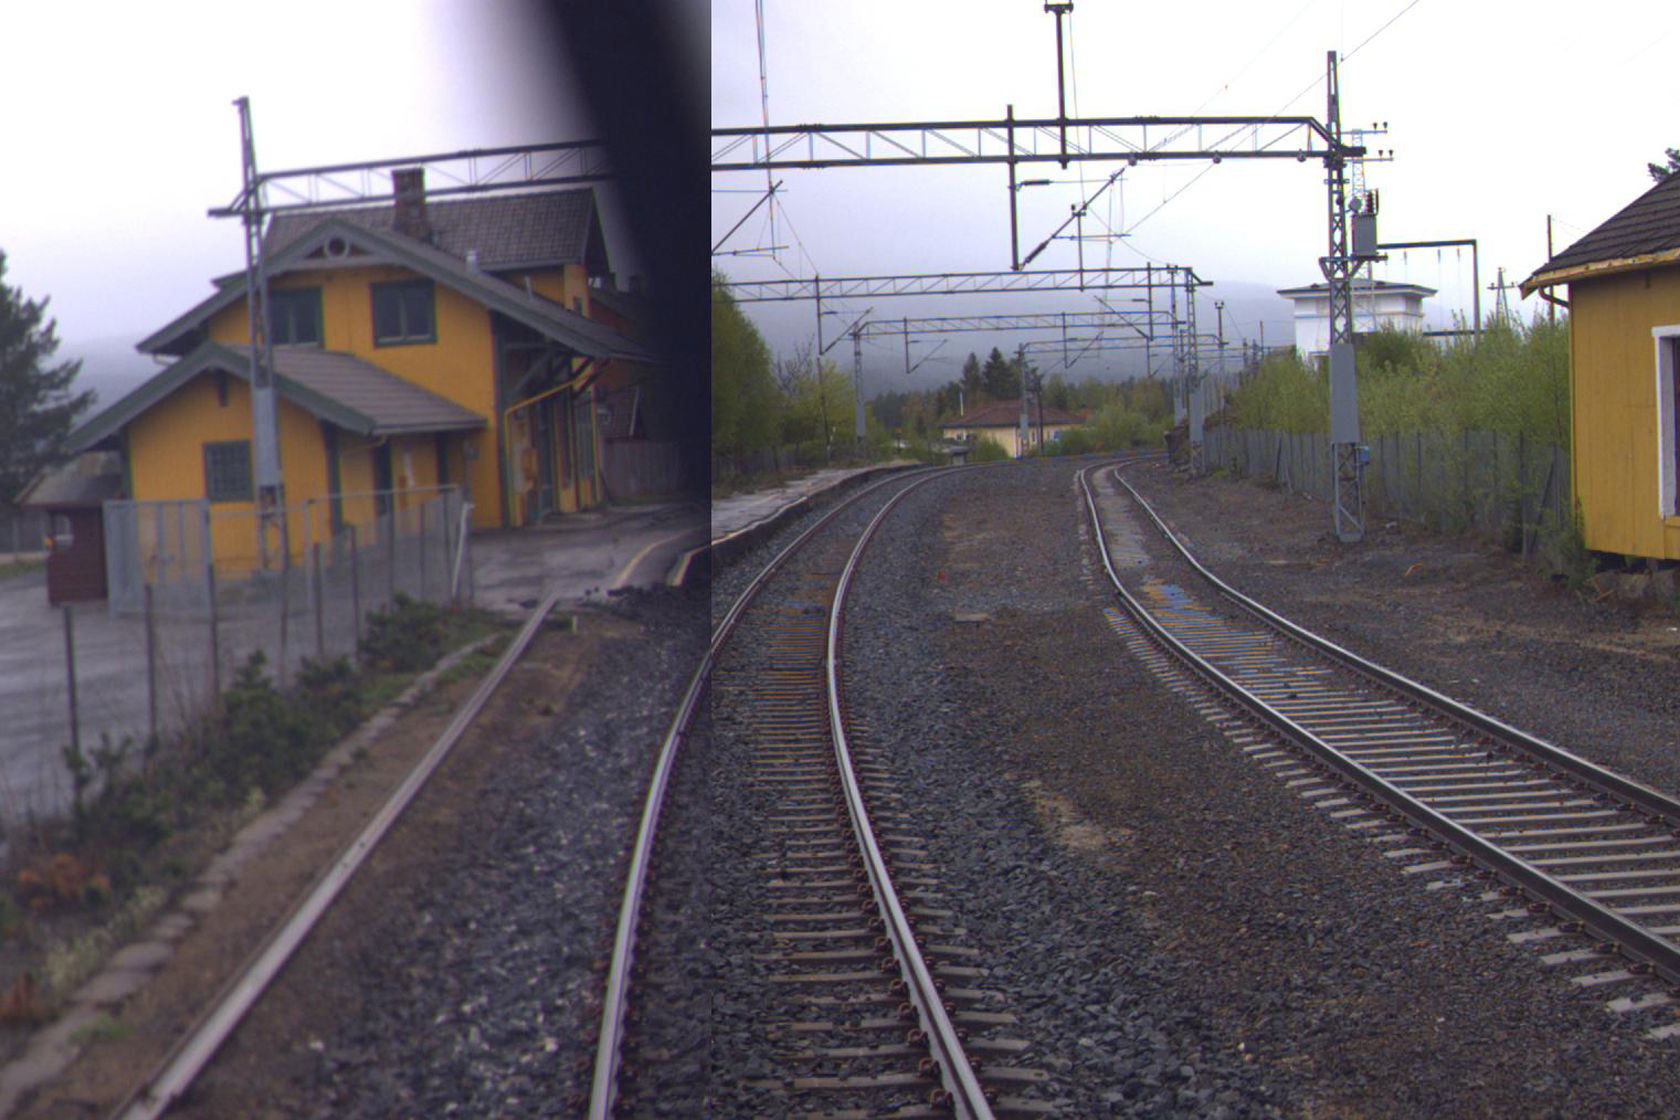 Tracks and buildings at Skollenborg station